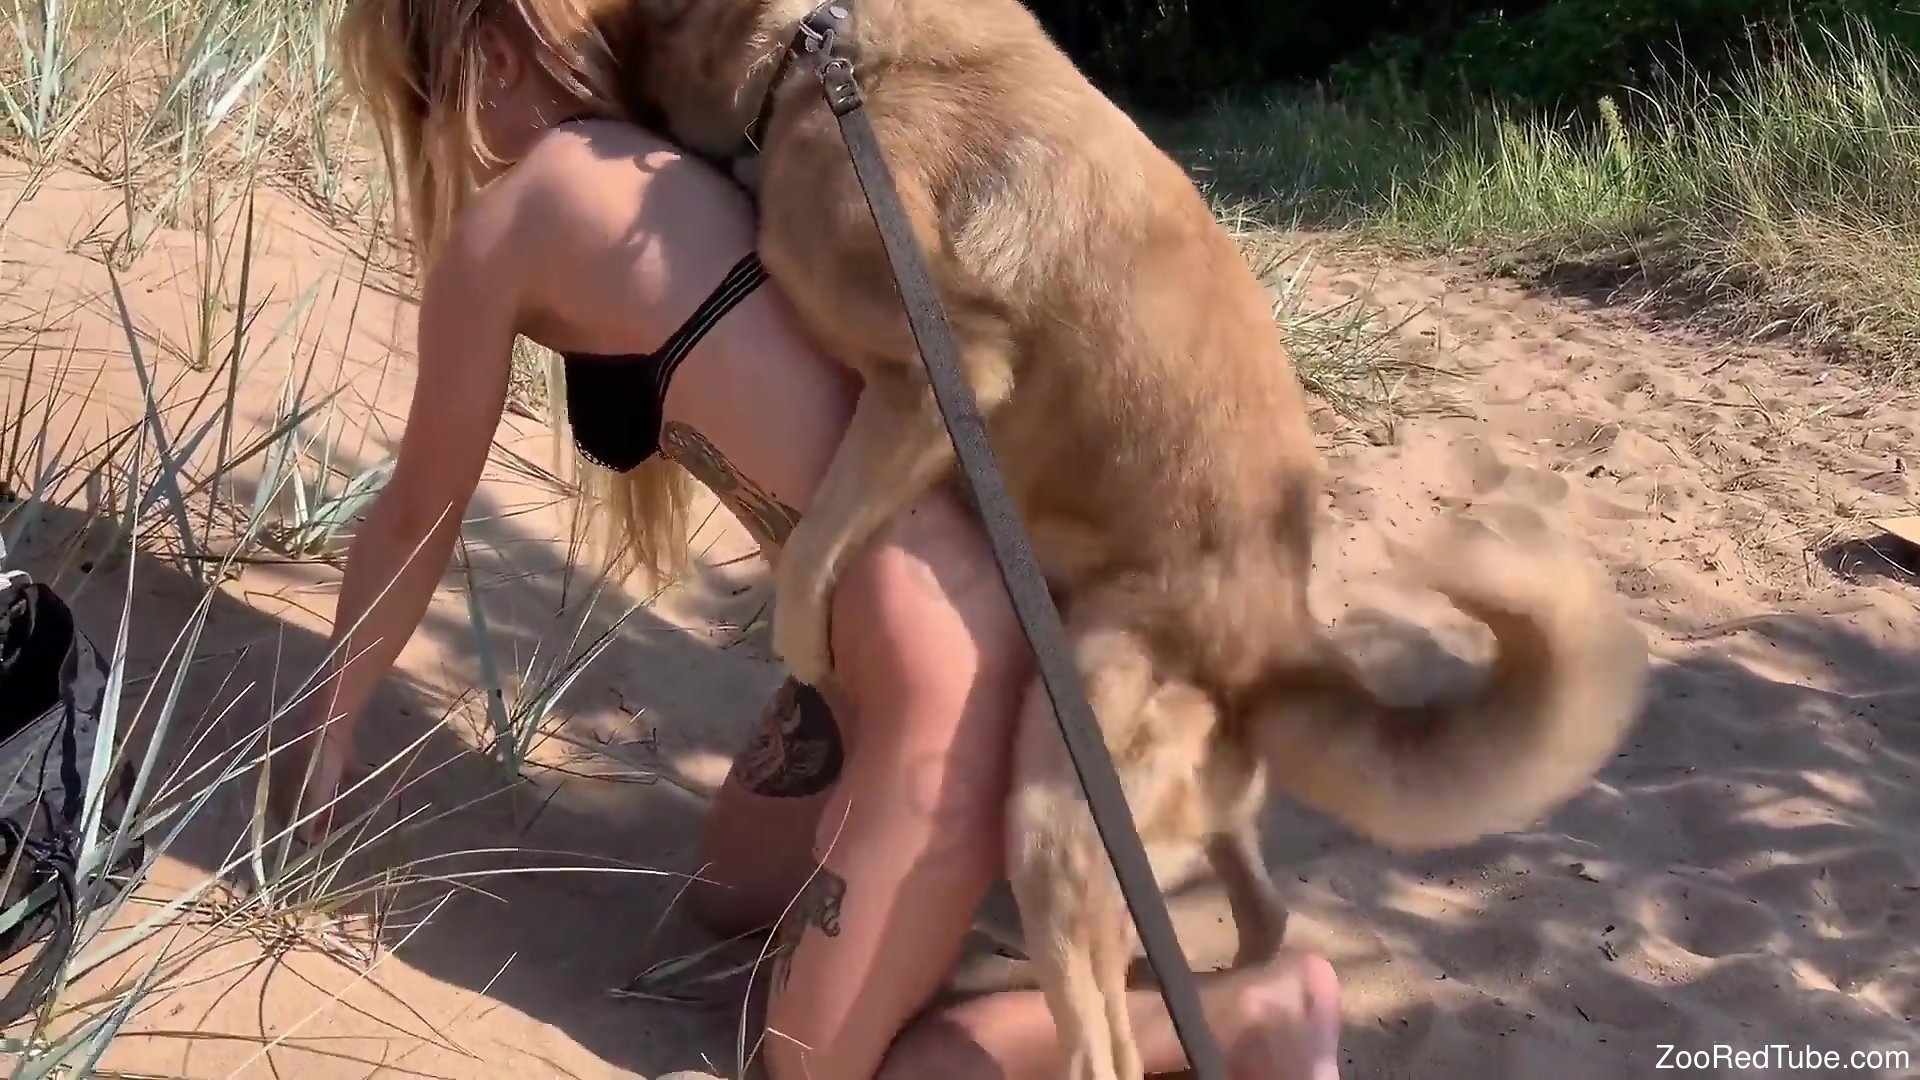 Xxx Sexy Dog And Beach - Nude female enjoys outdoor sex by the beach with her dog